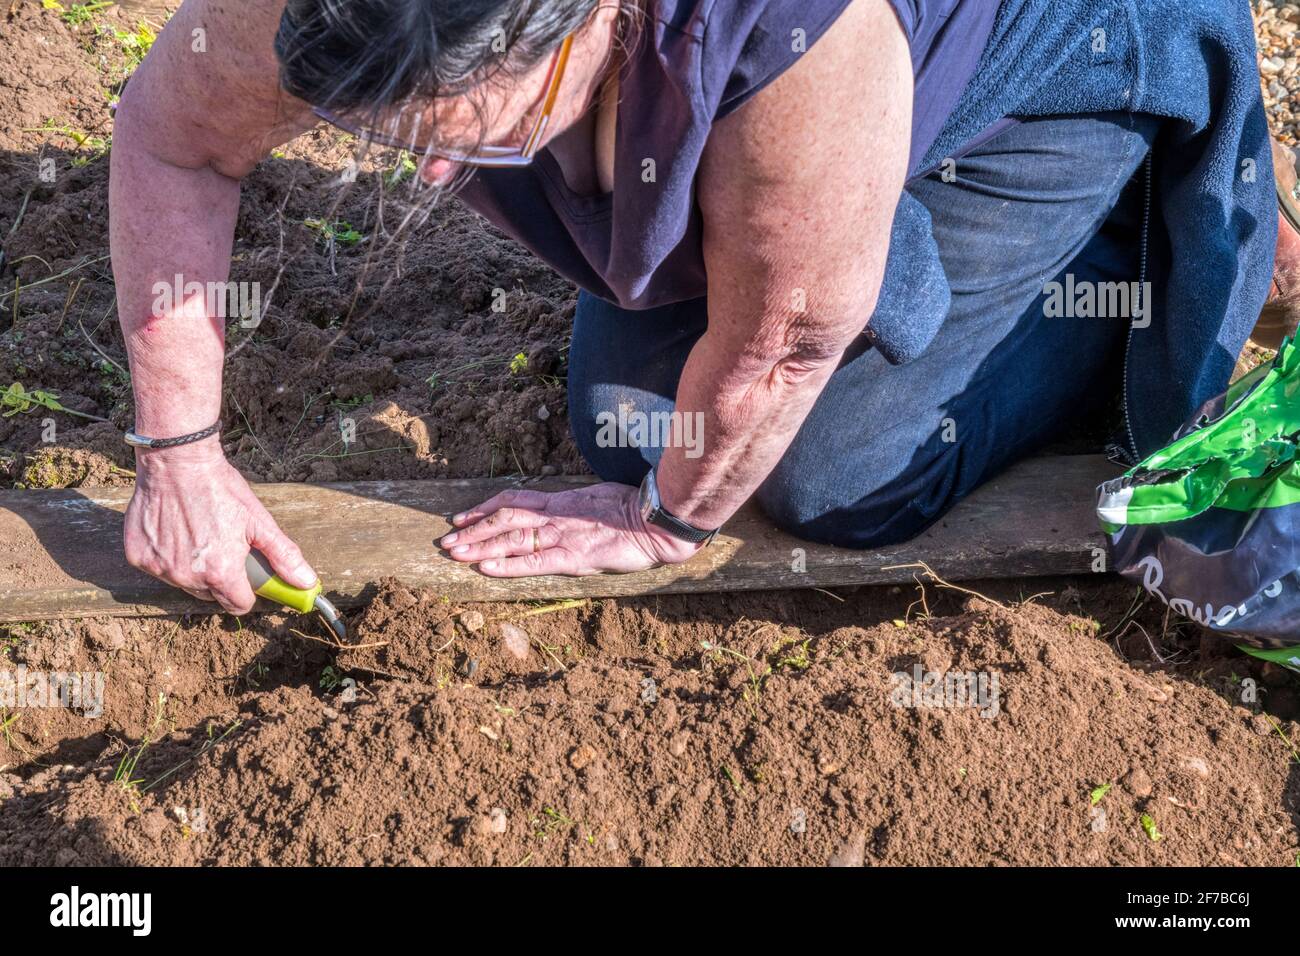 Woman using a kneeling board to avoid disturbing the soil when planting in a raised bed. Stock Photo